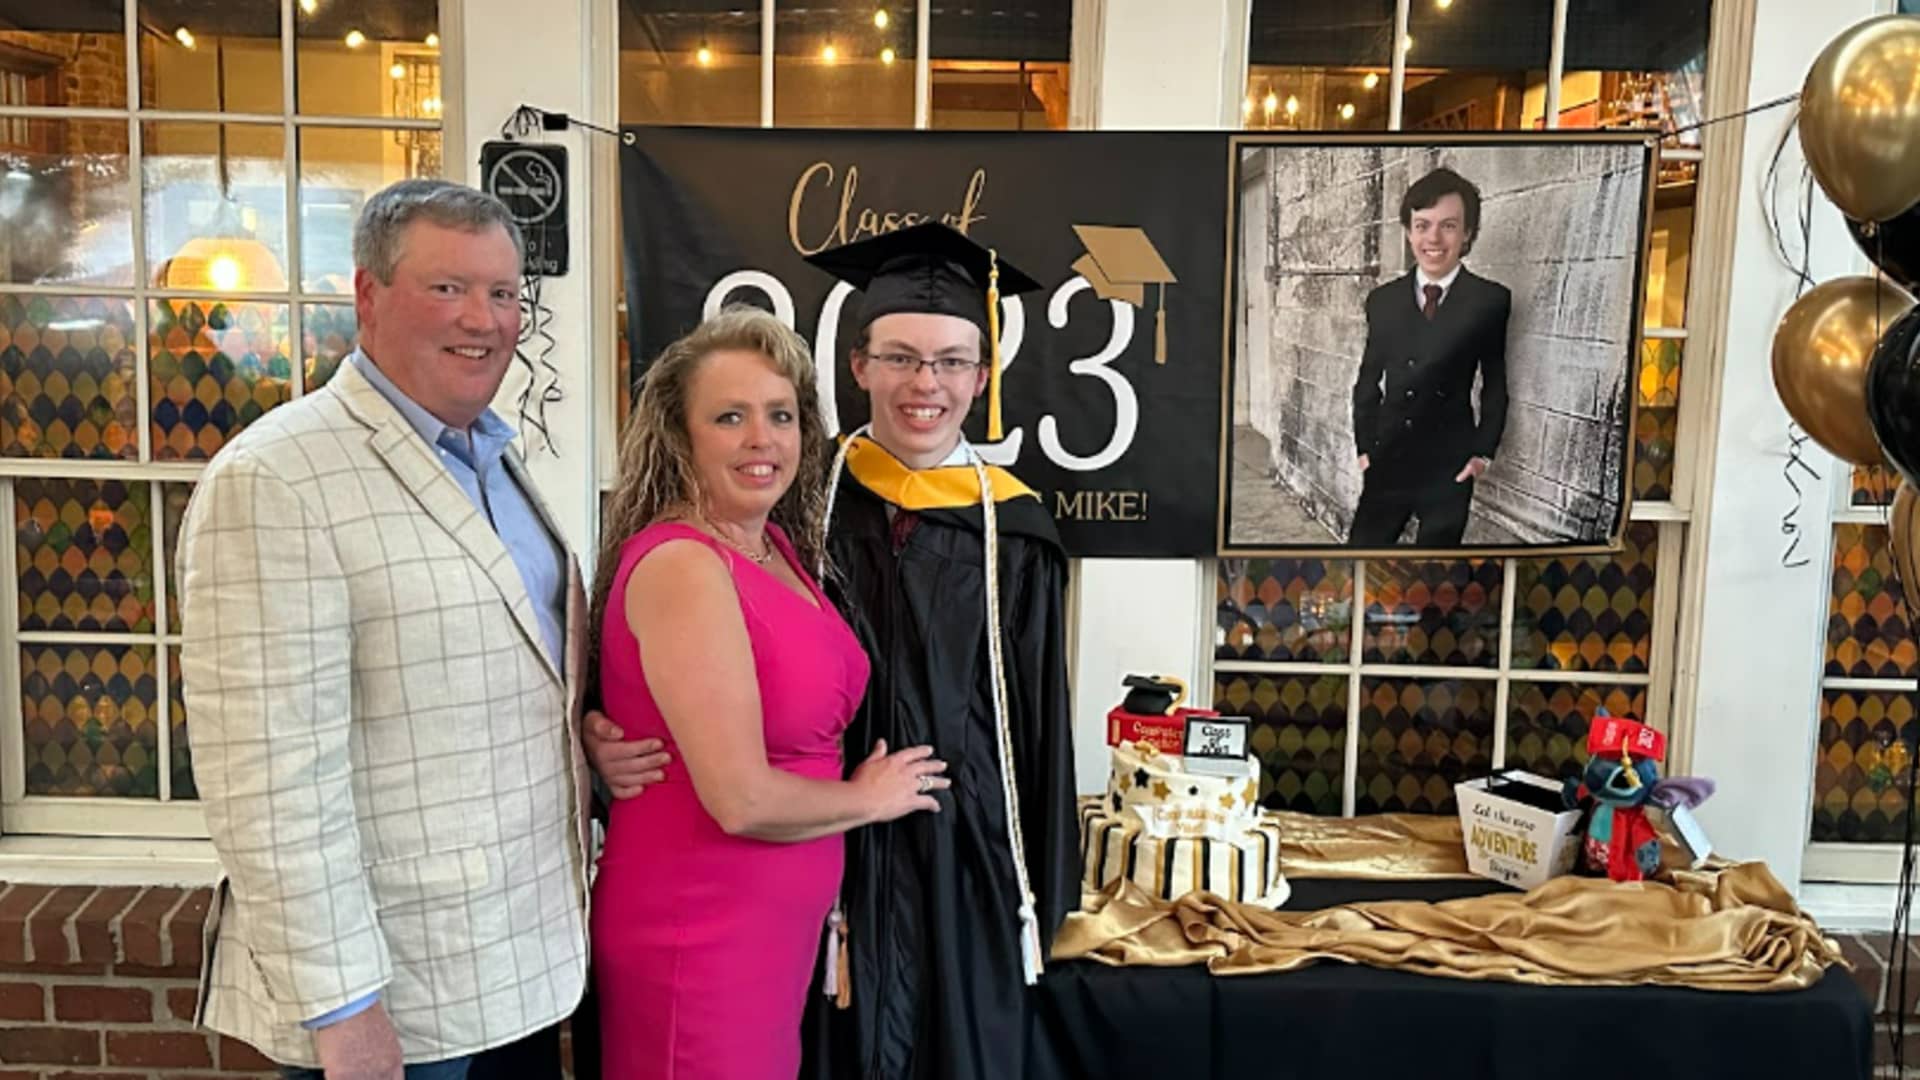 Mom and dad of 14-year-old college grad share their No. 1 parenting rule: We ‘left no room for negotiating on his social skills’